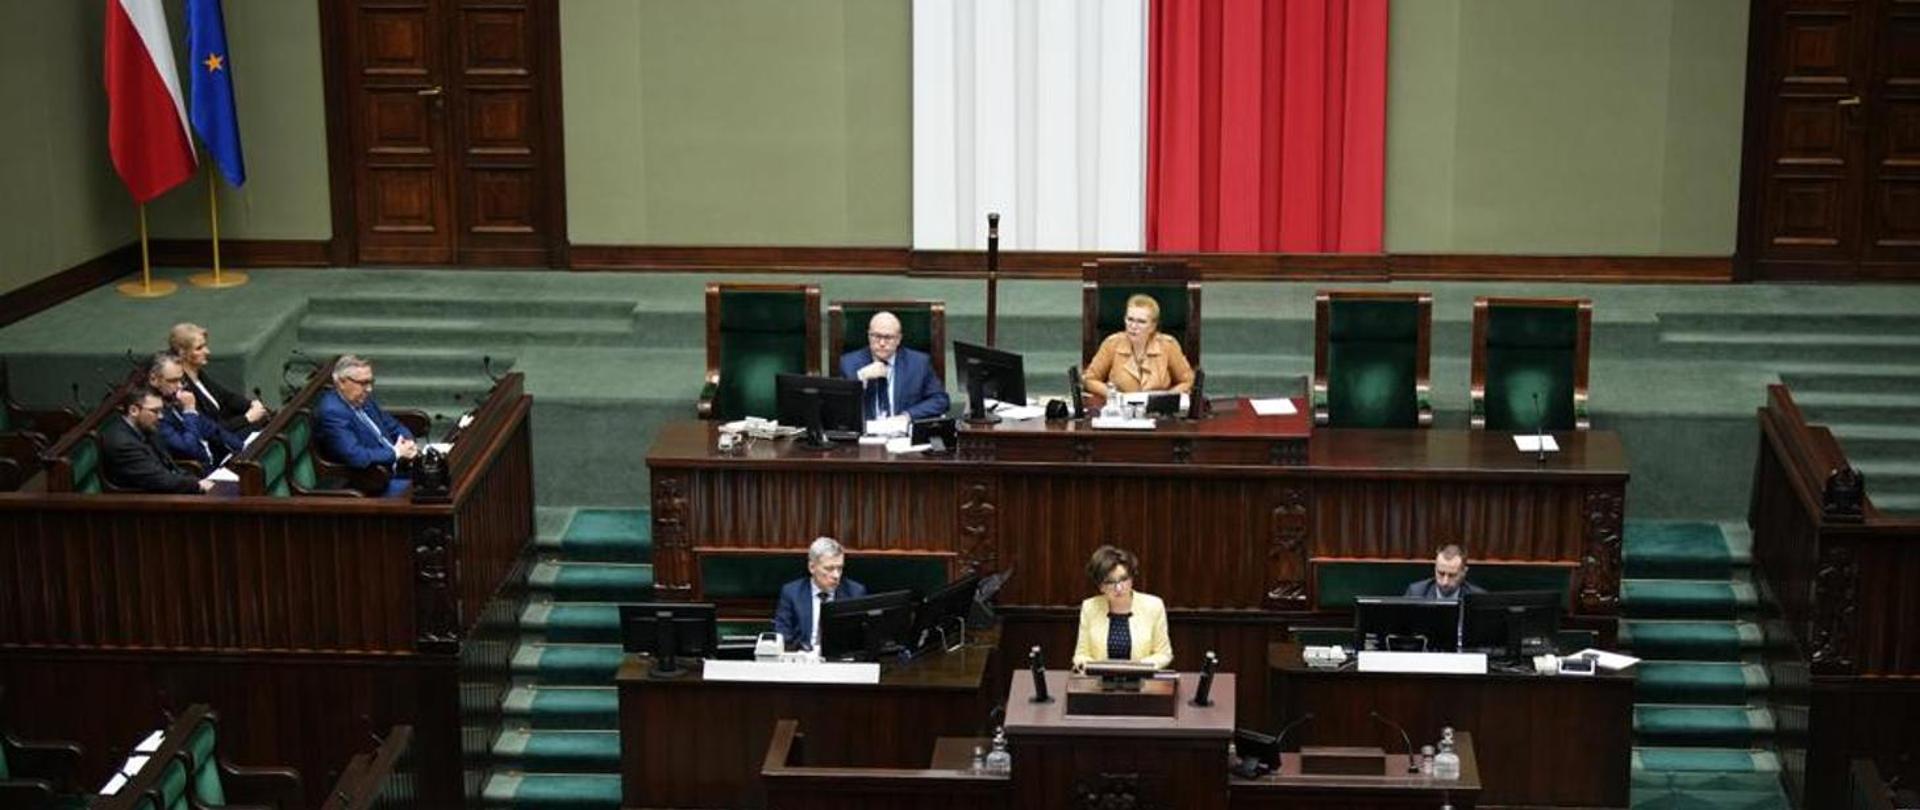 Minister Maląg speaks in the Sejm on supporting families